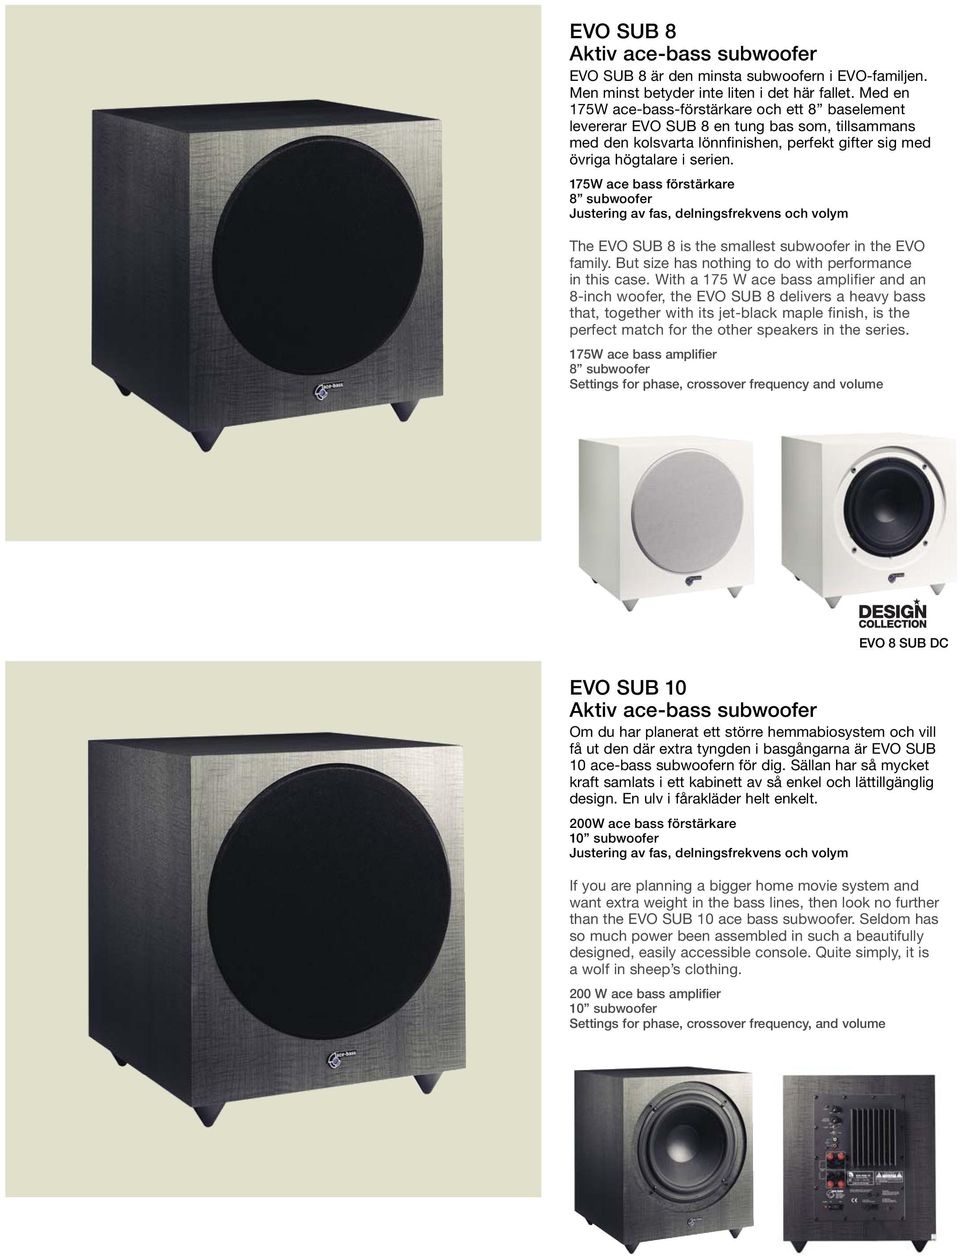 175W ace bass förstärkare subwoofer Justering av fas, delningsfrekvens och volym The EVO SUB is the smallest subwoofer in the EVO family. But size has nothing to do with performance in this case.